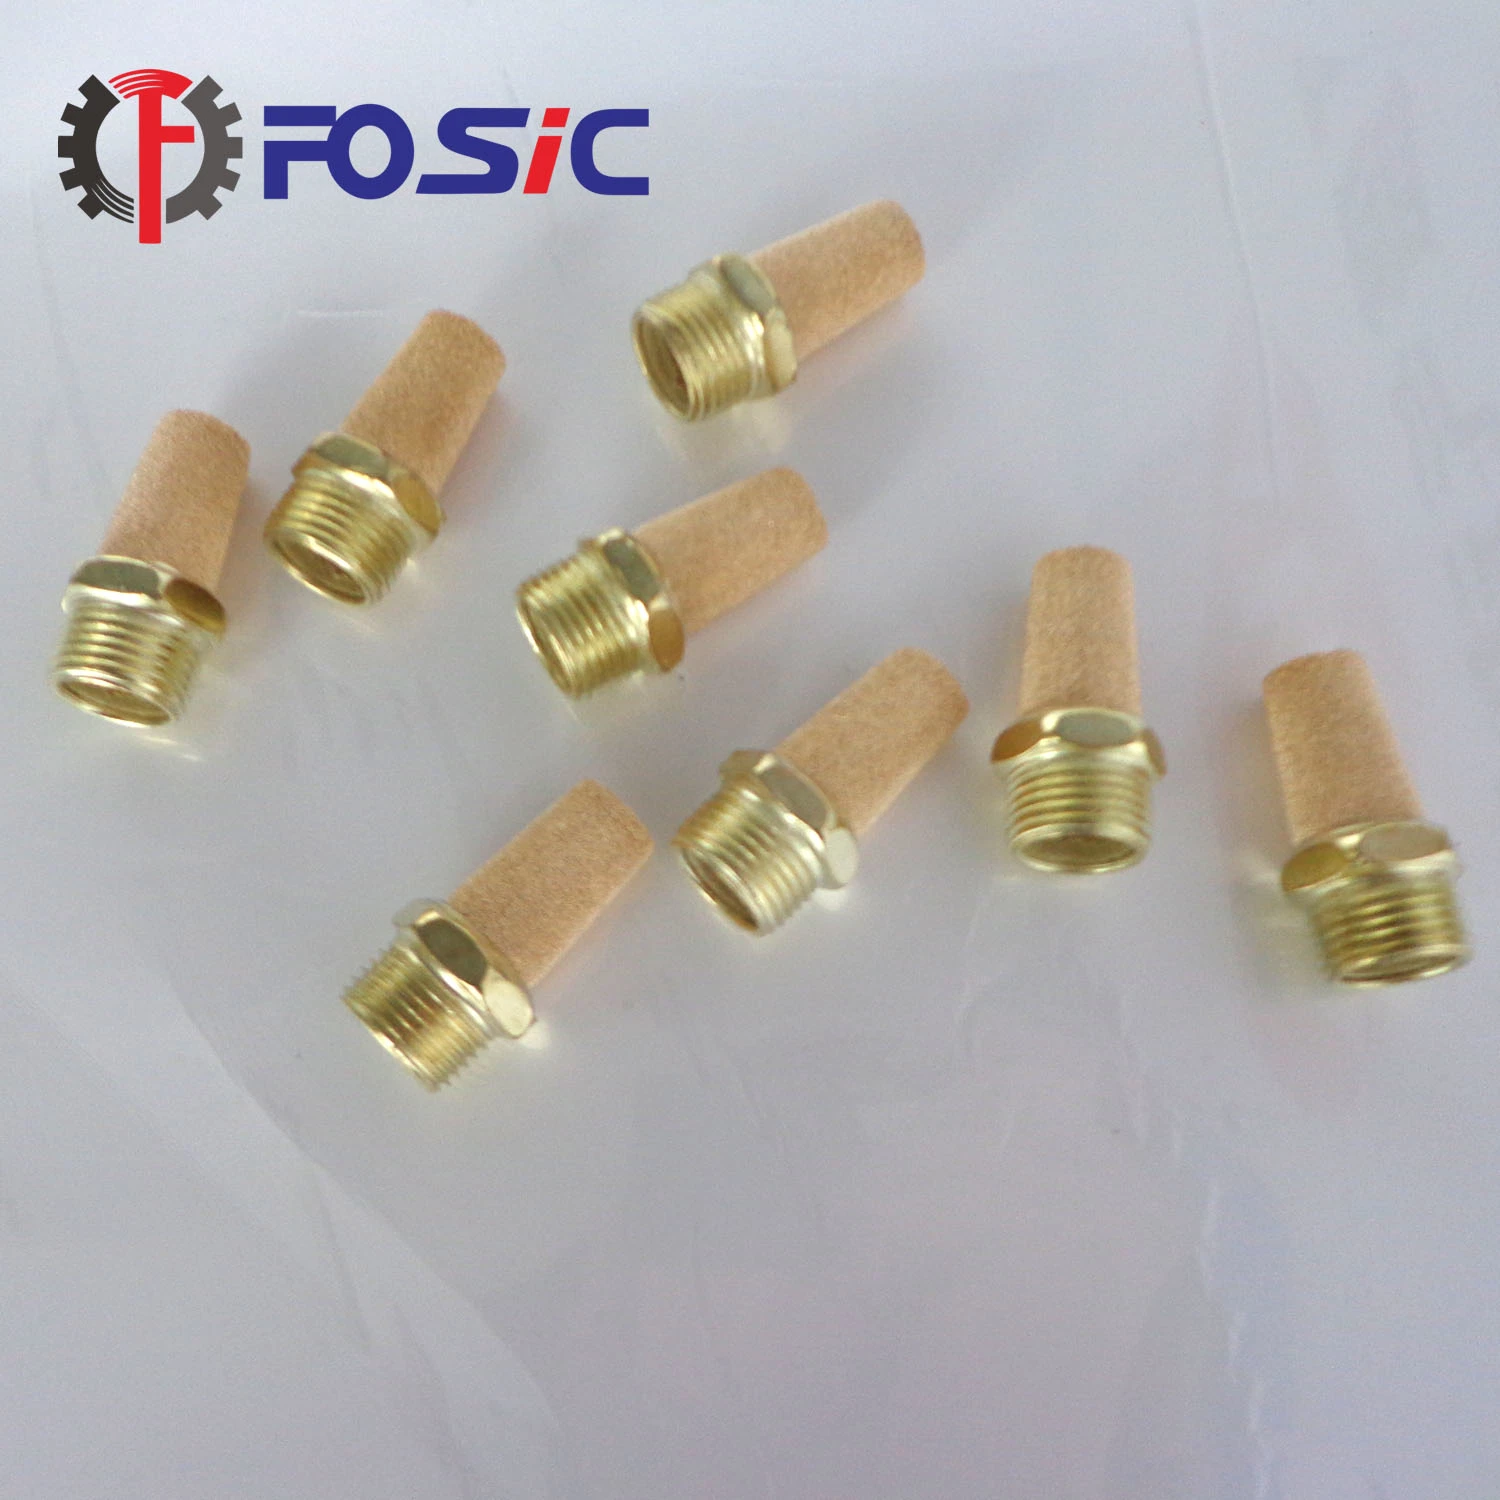 Durable in Use Copper Muffler Head Quick Pneumatic Muffler Noise Connector Tube Fitting